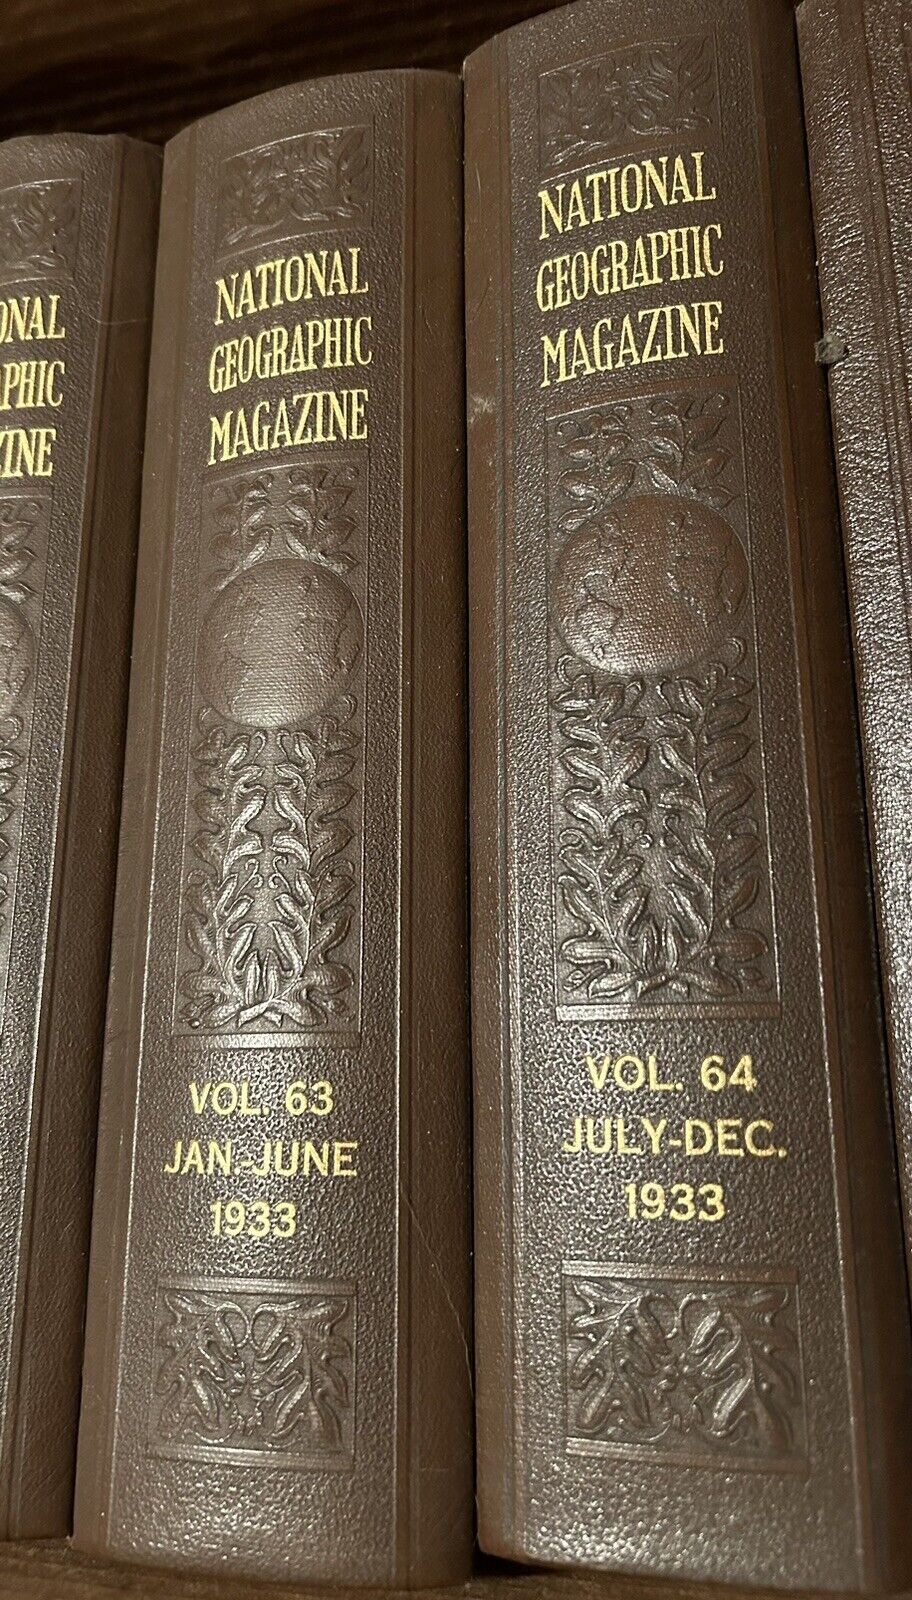 1933 - National Geographic Volumes 63-64 Leather Bound